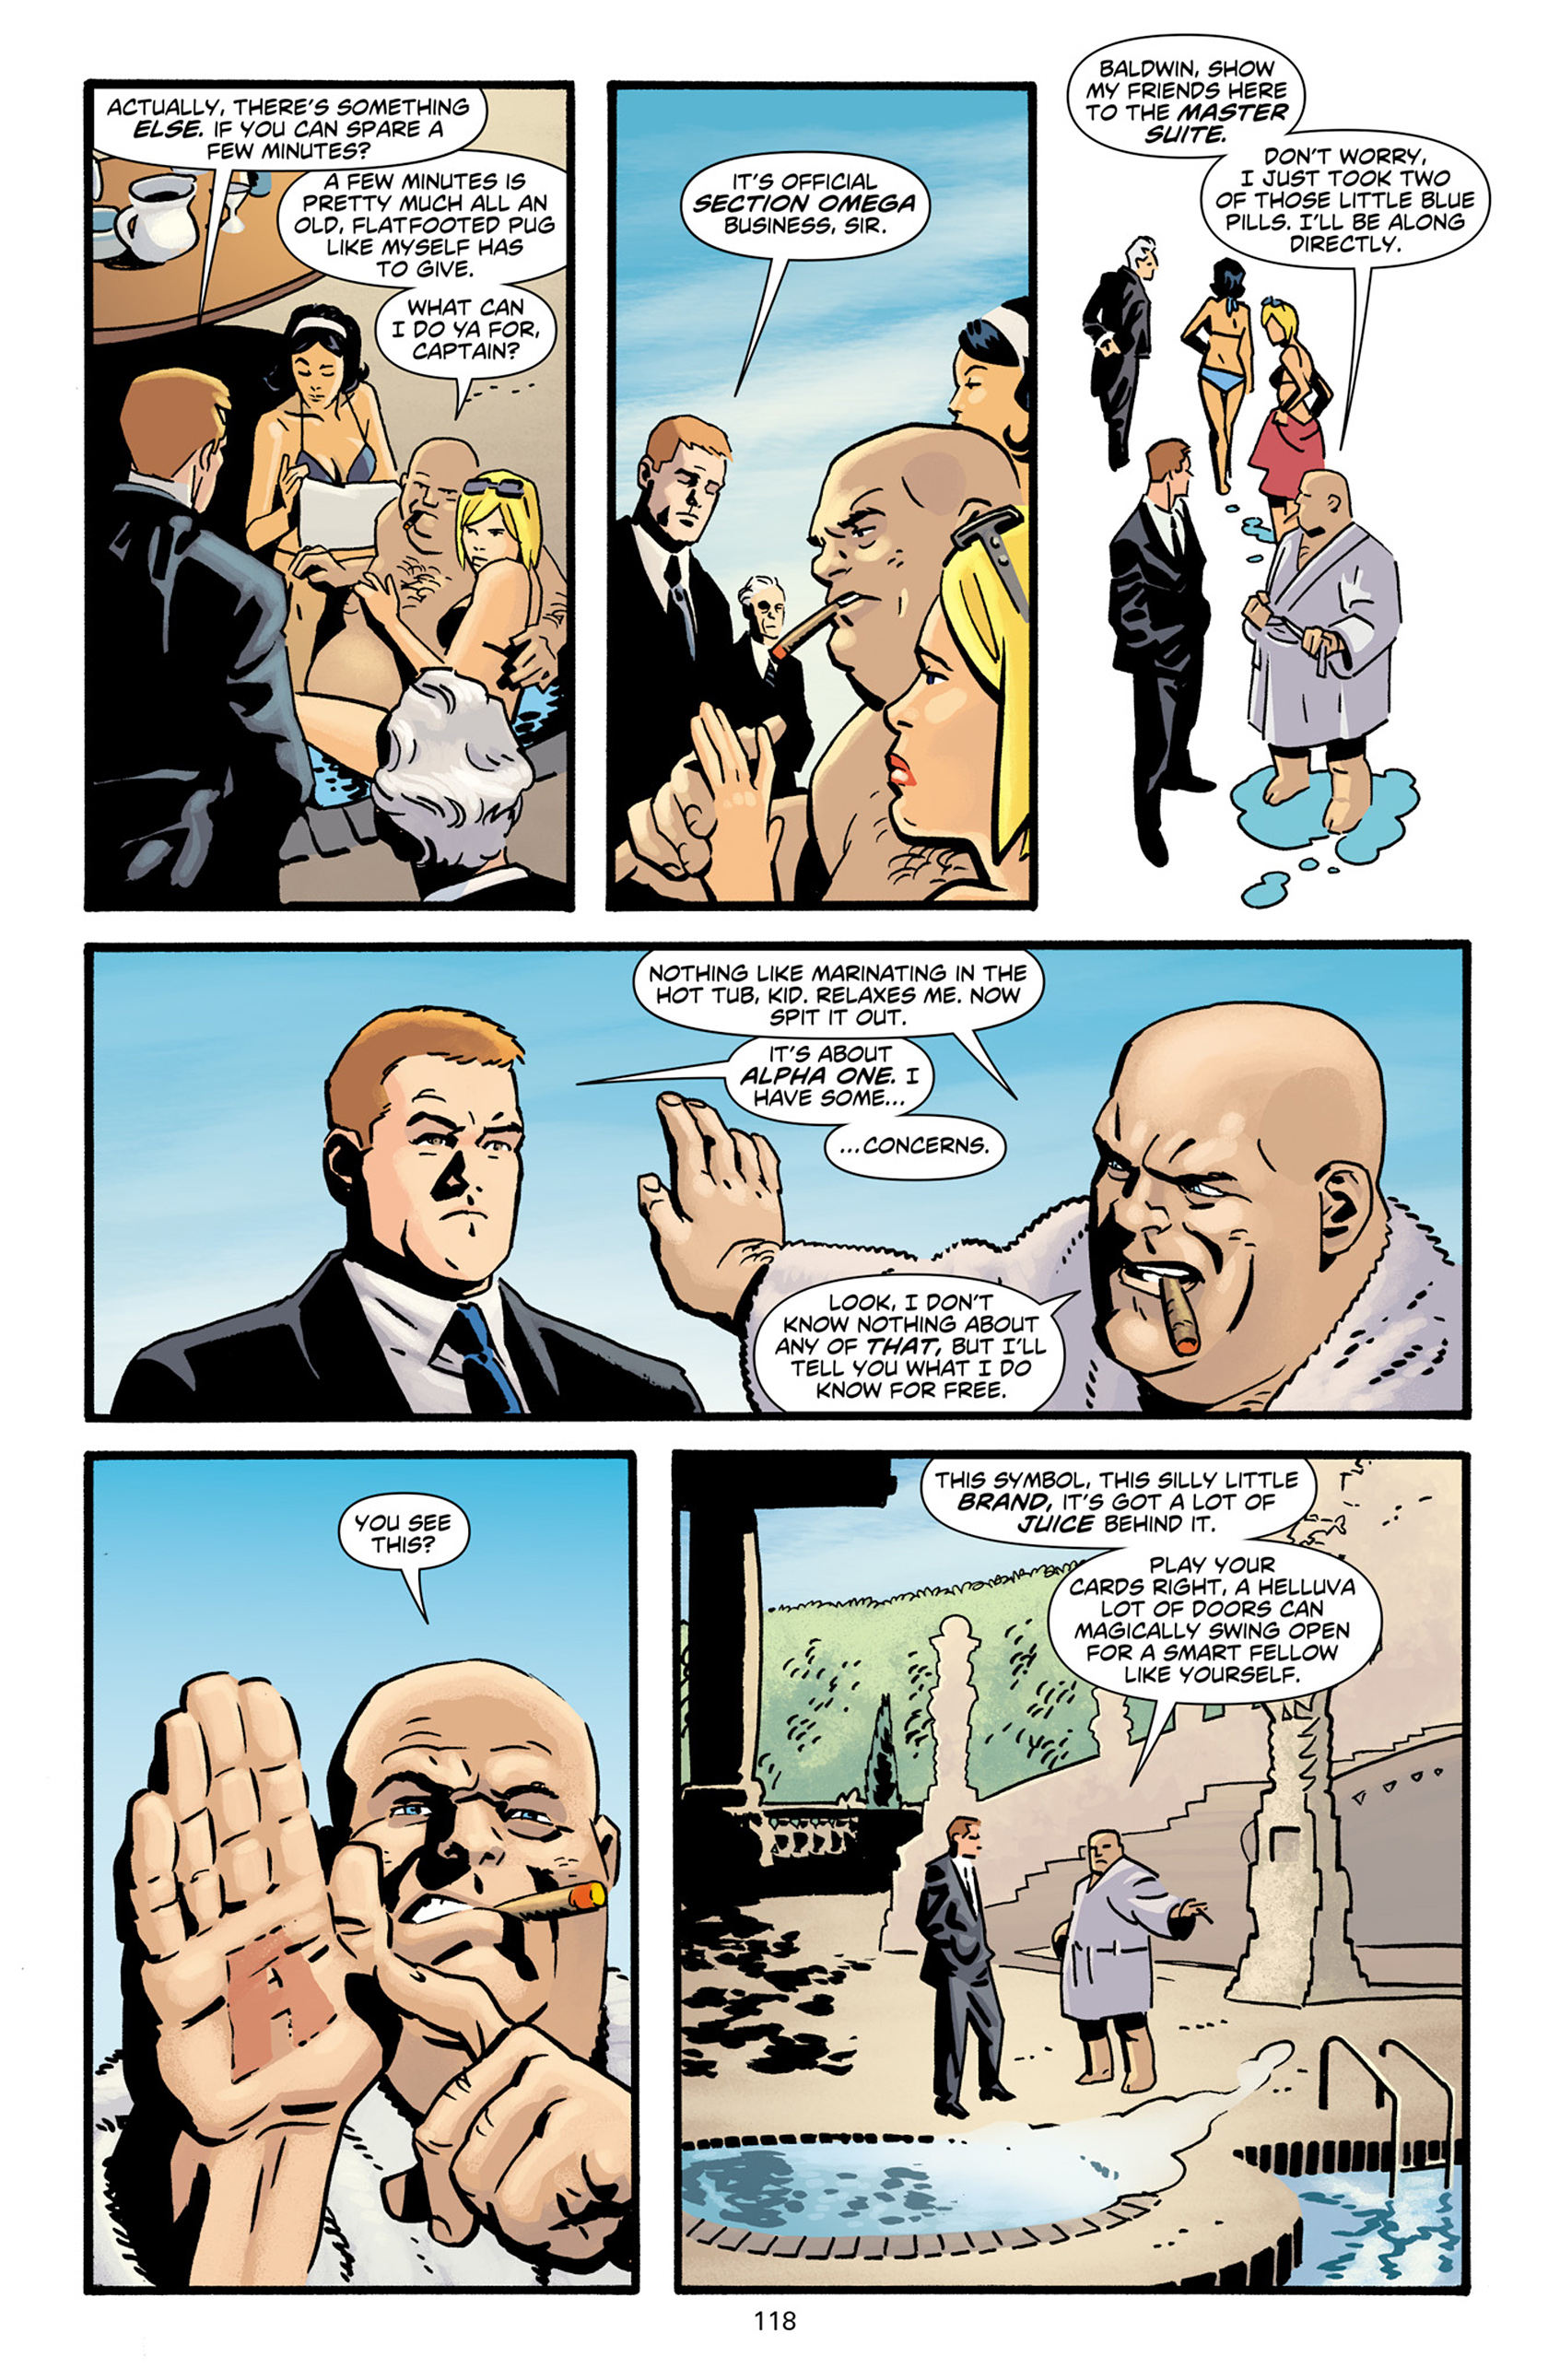 Read online The Mighty comic -  Issue # TPB - 113